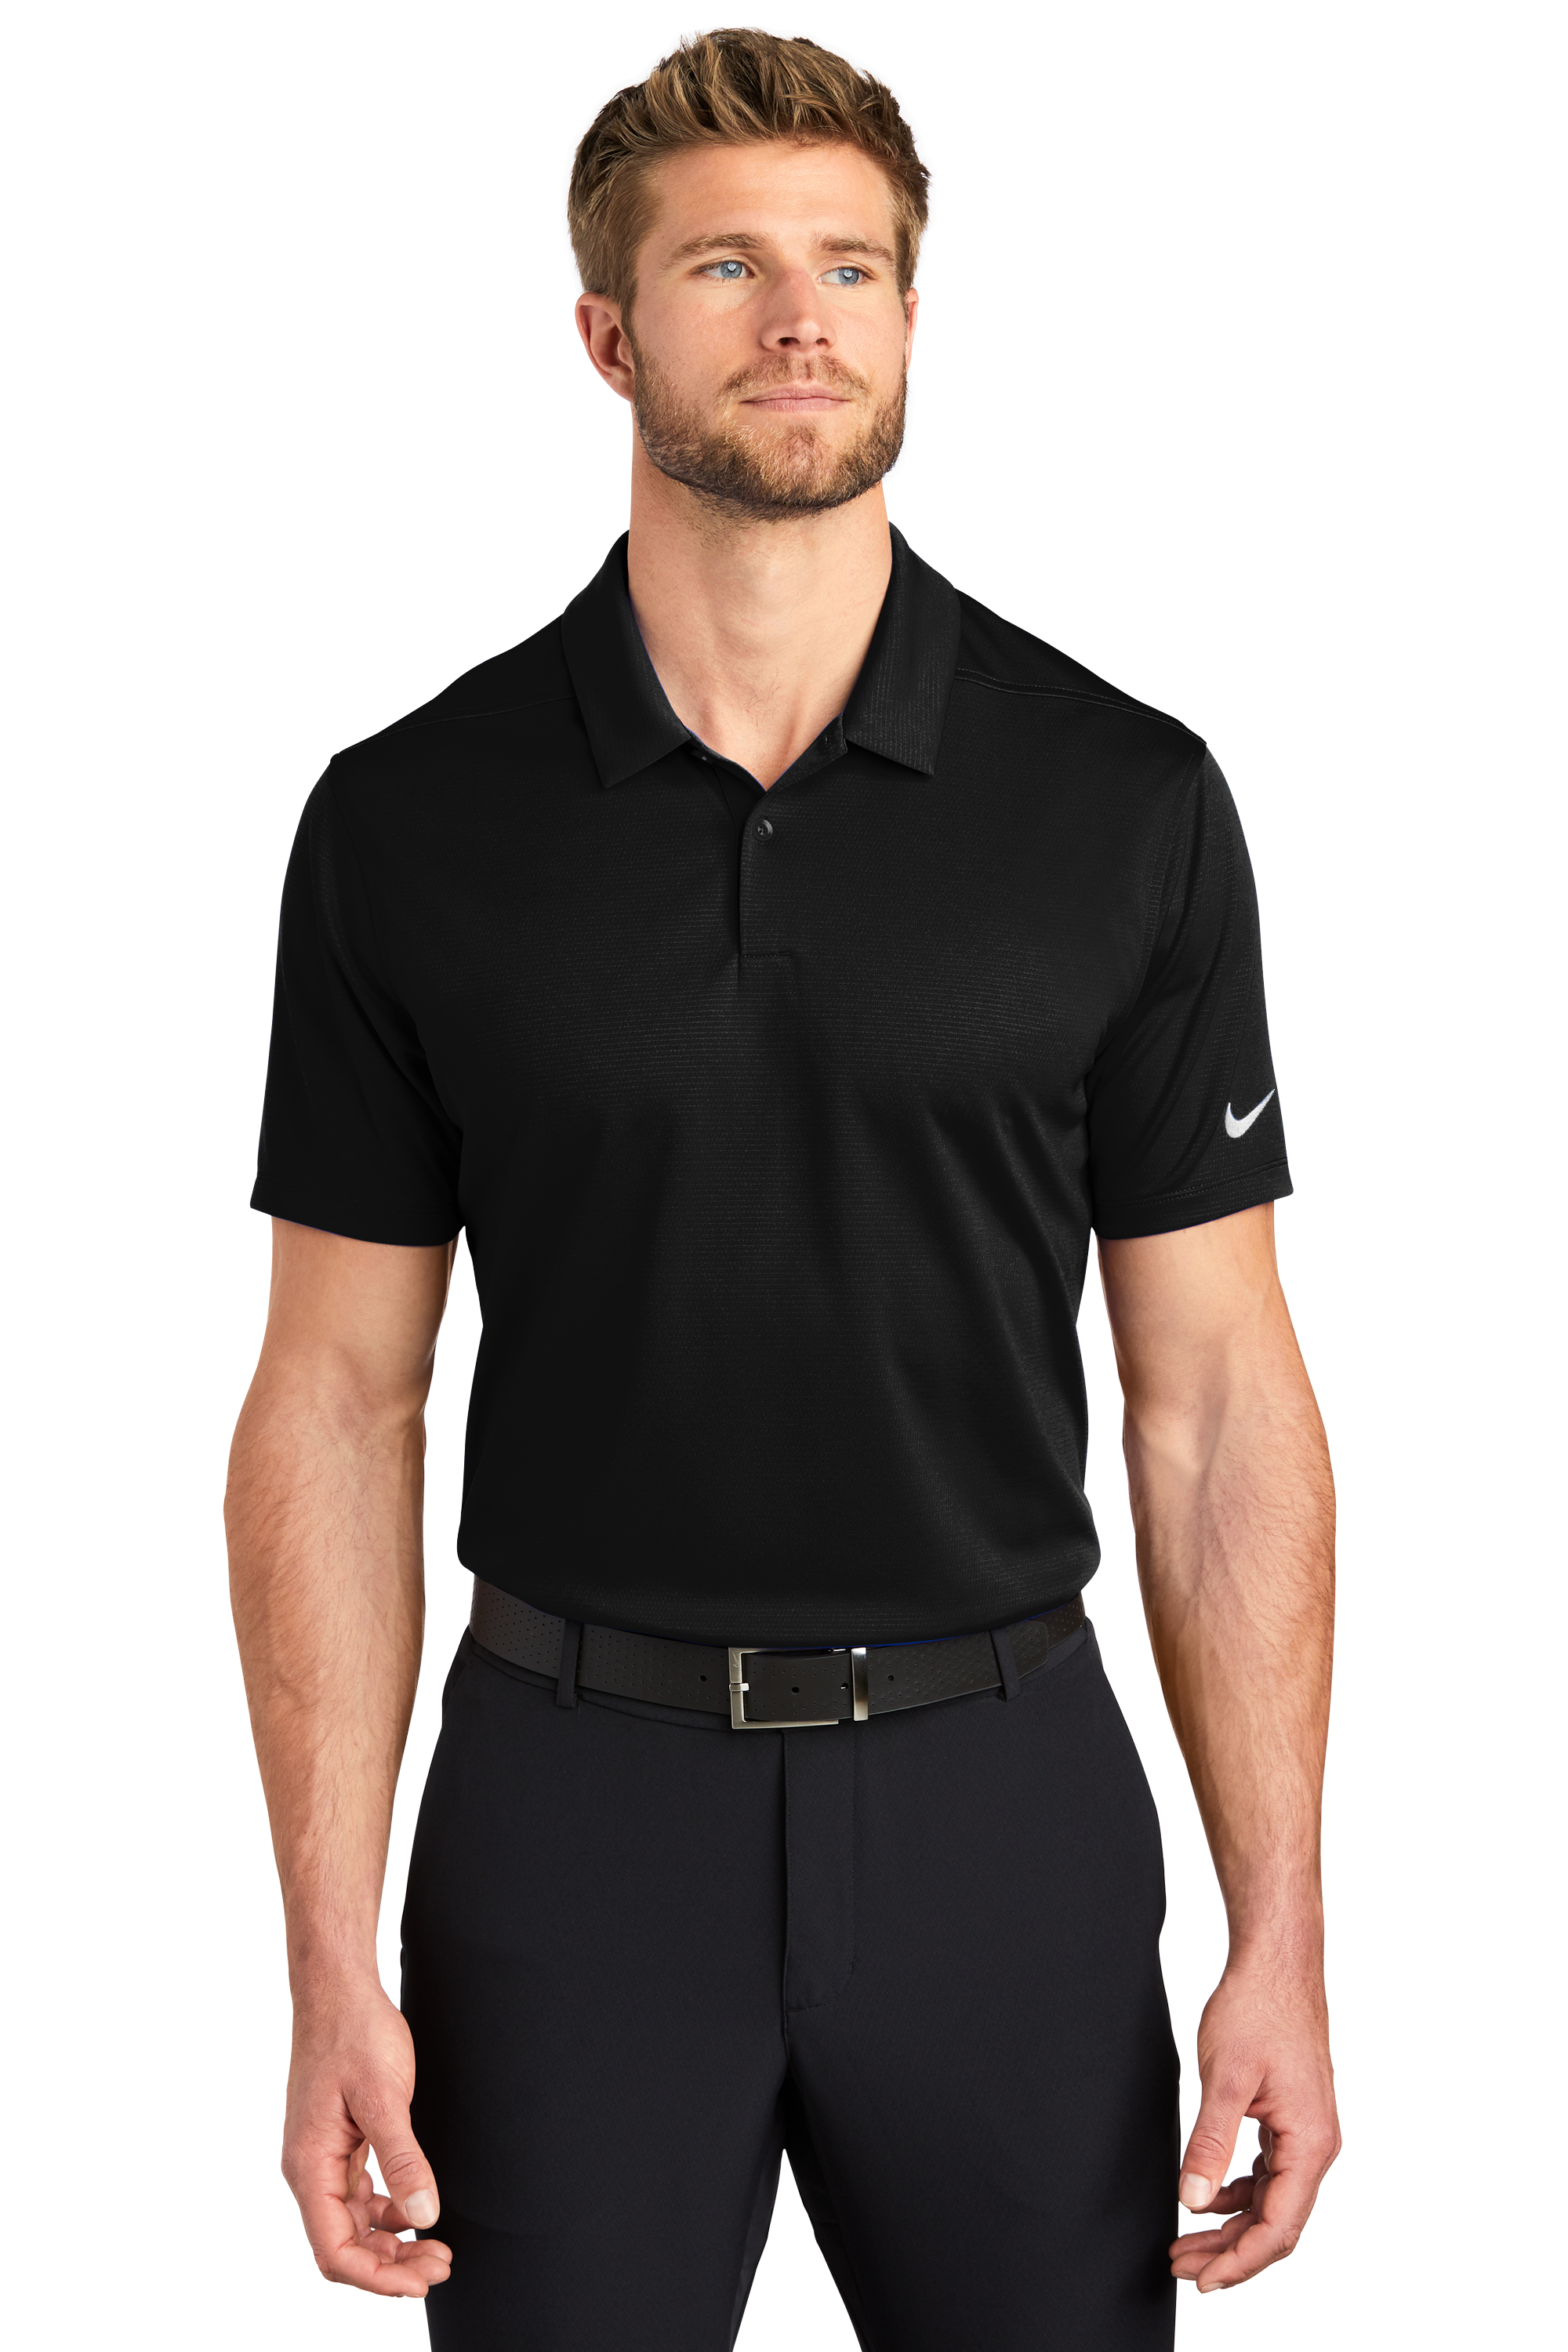 Nike Embroidered Men's Dry Essential Solid Polo | Polos - Queensboro